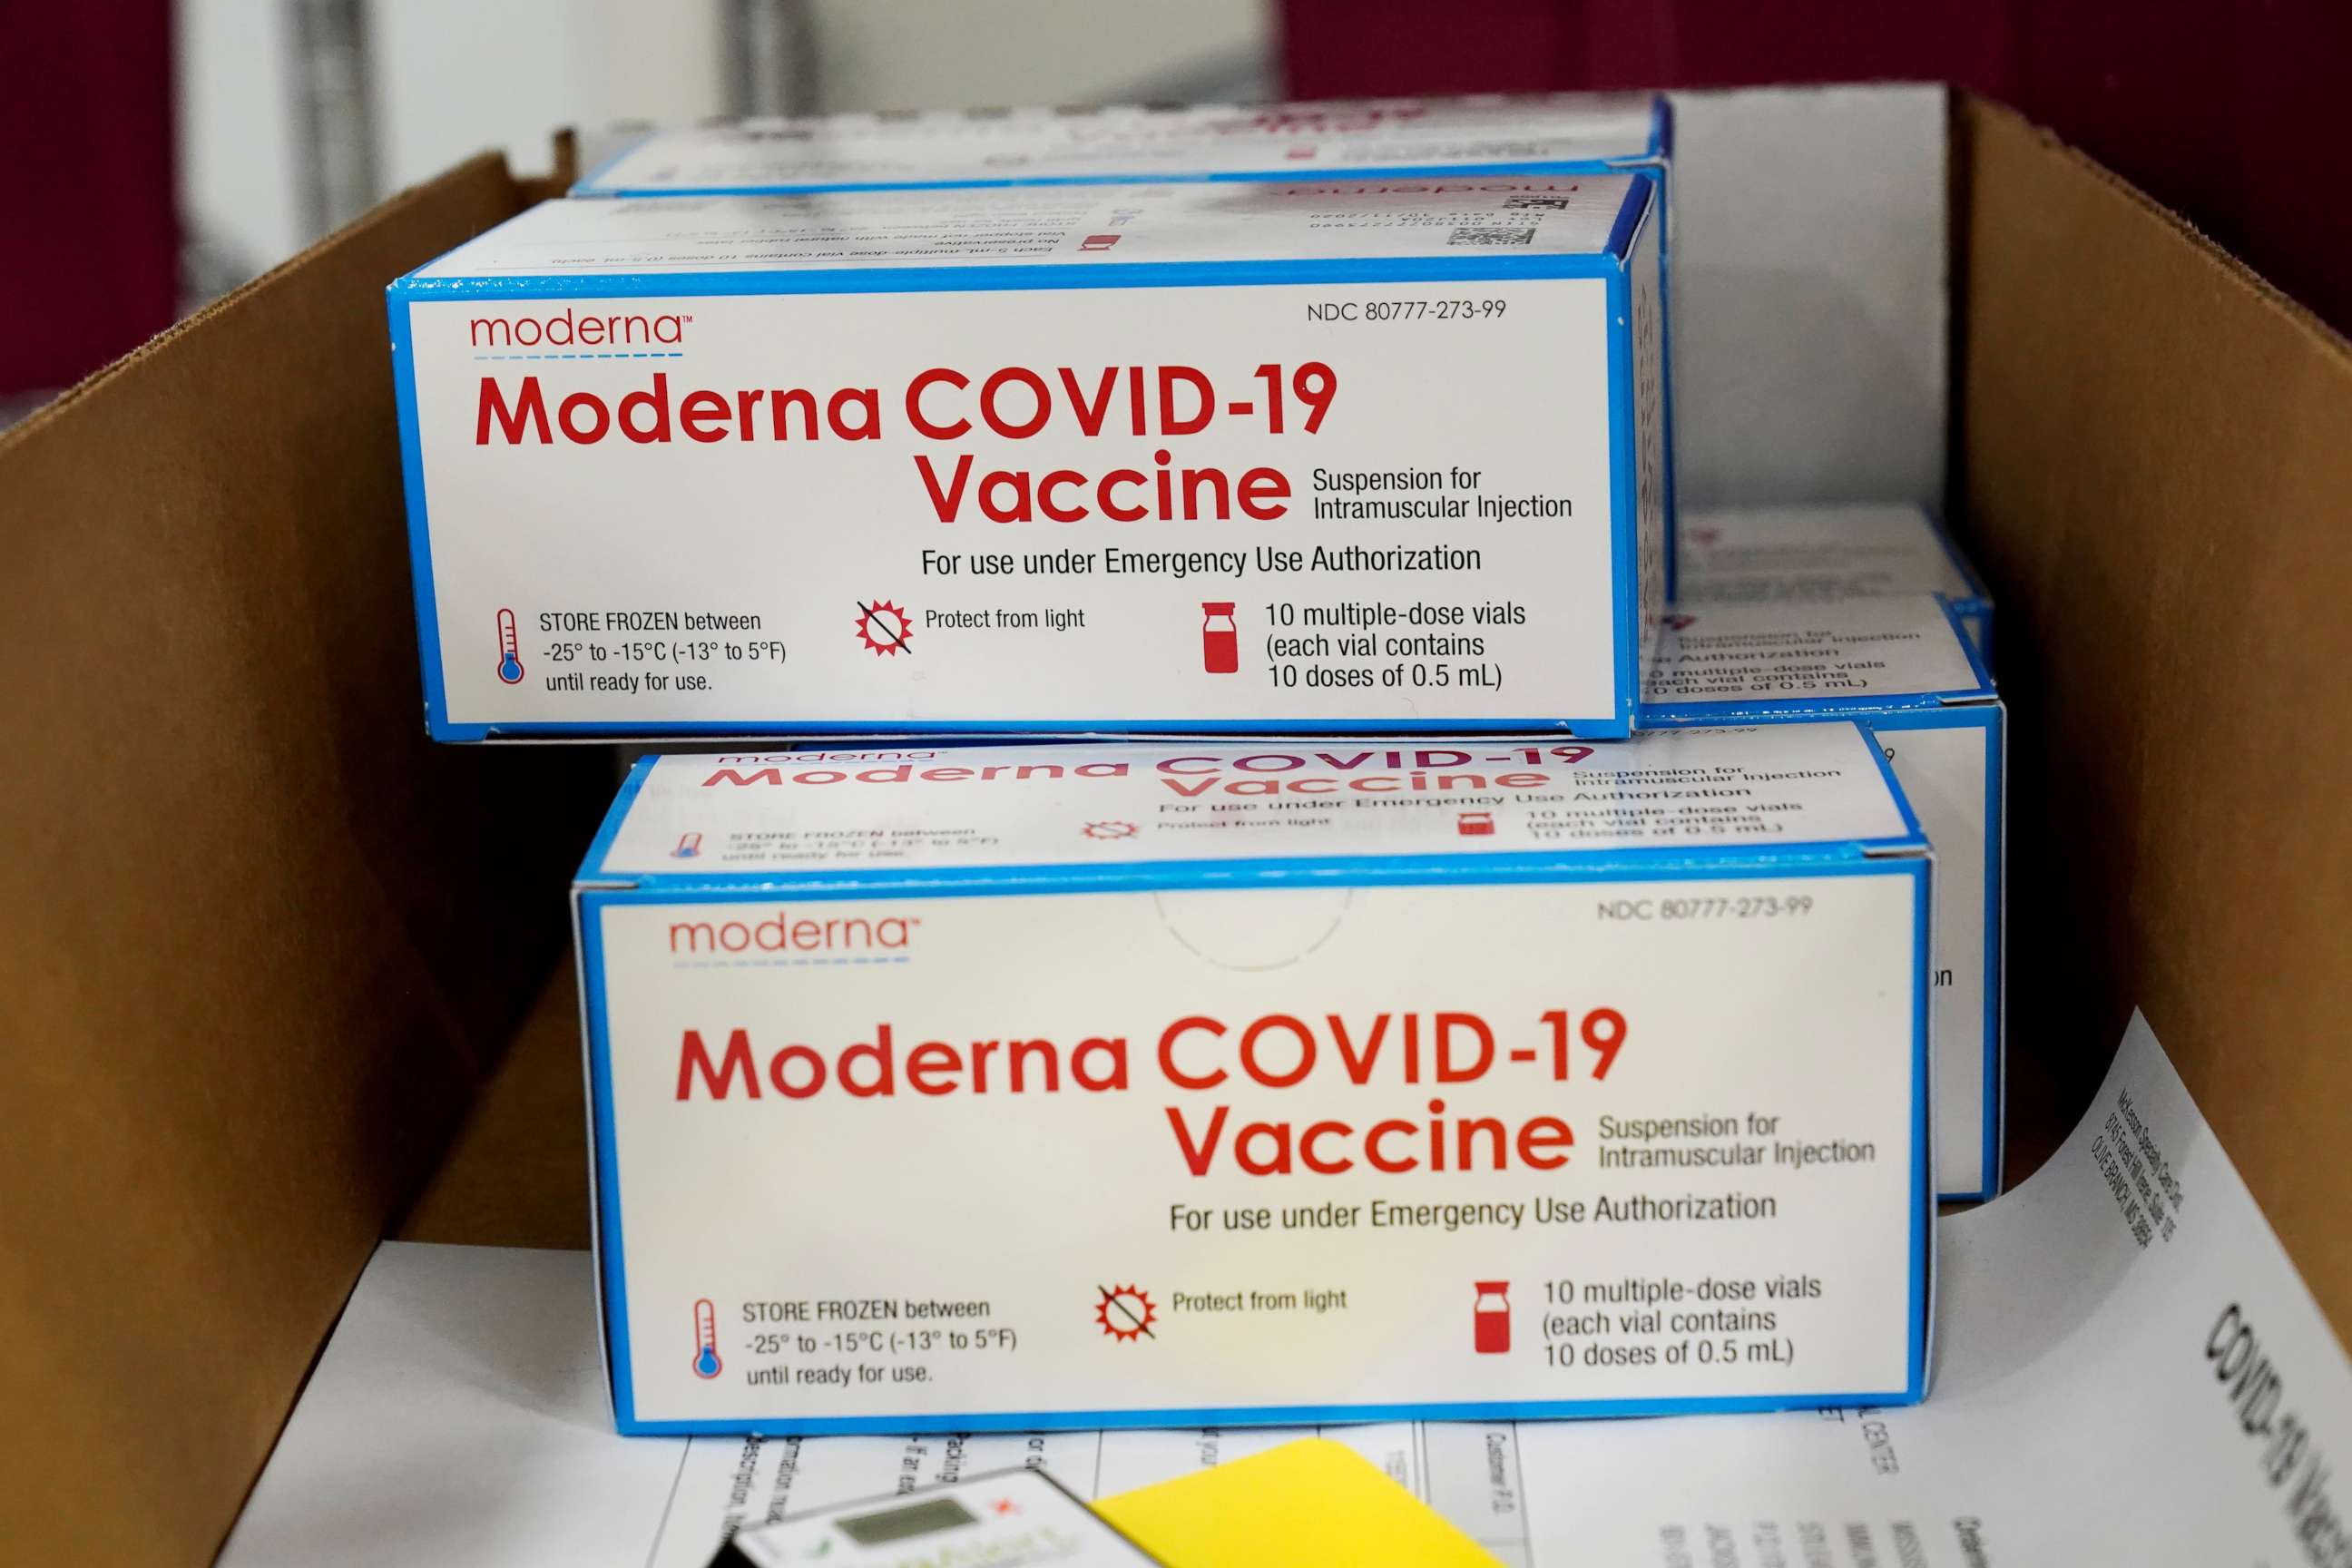 PHOTO: Boxes containing the Moderna COVID-19 vaccine are prepared to be shipped at the McKesson distribution center in Olive Branch, Miss., Dec. 20, 2020.